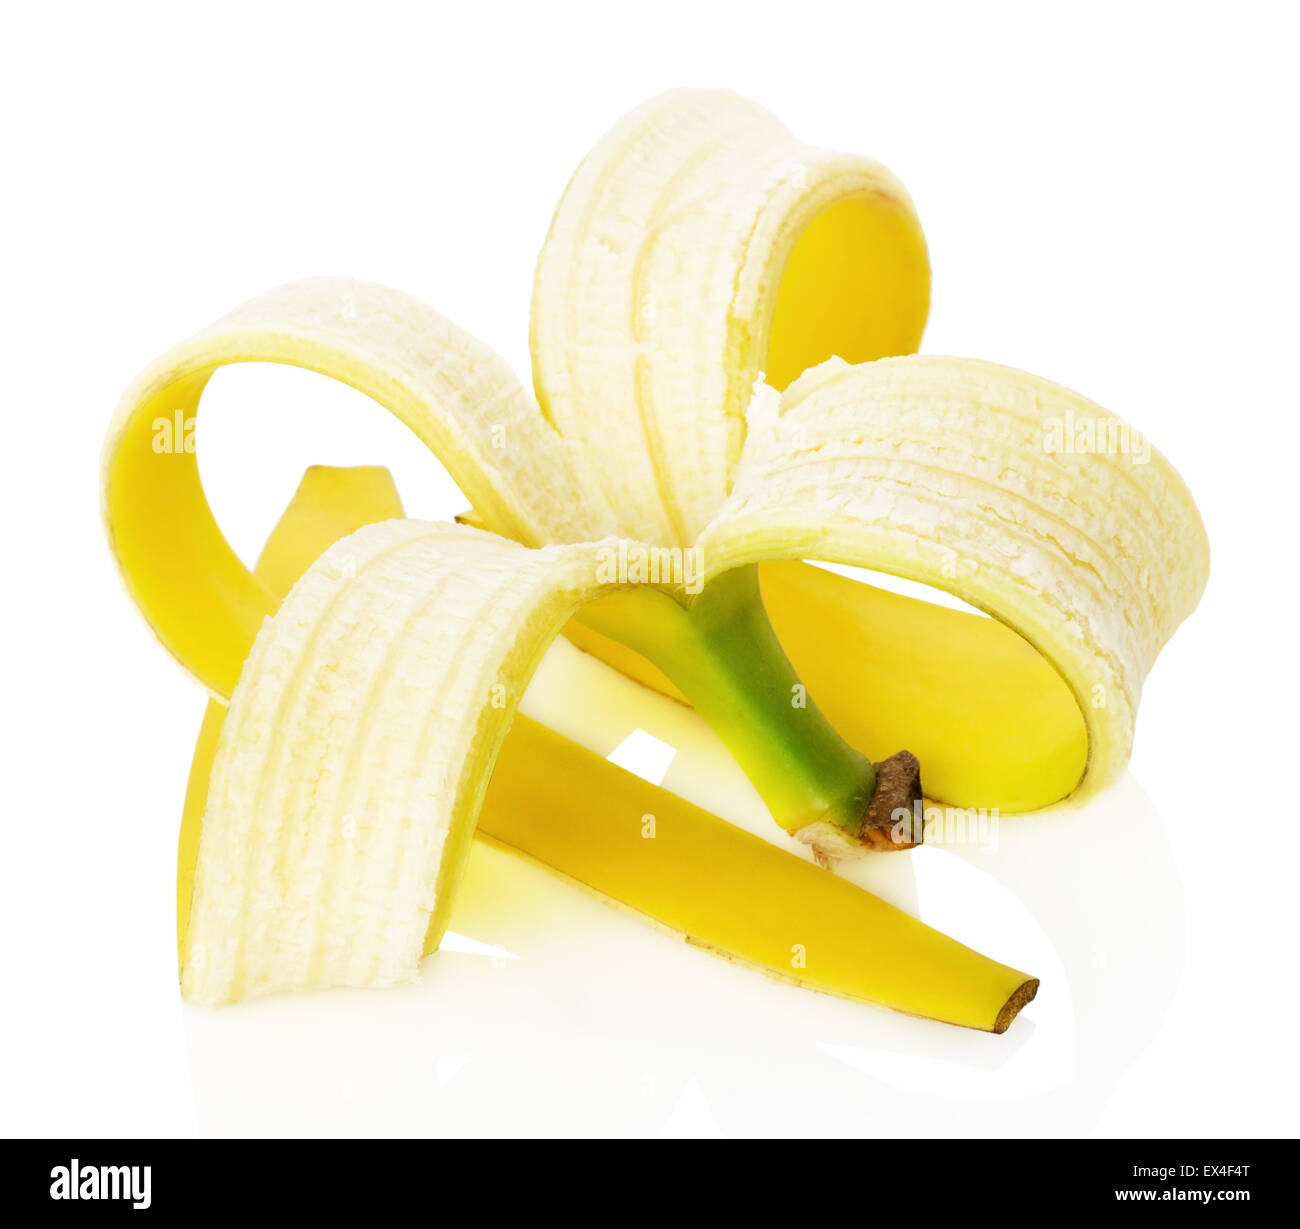 peel from a banana on the white background. Stock Photo